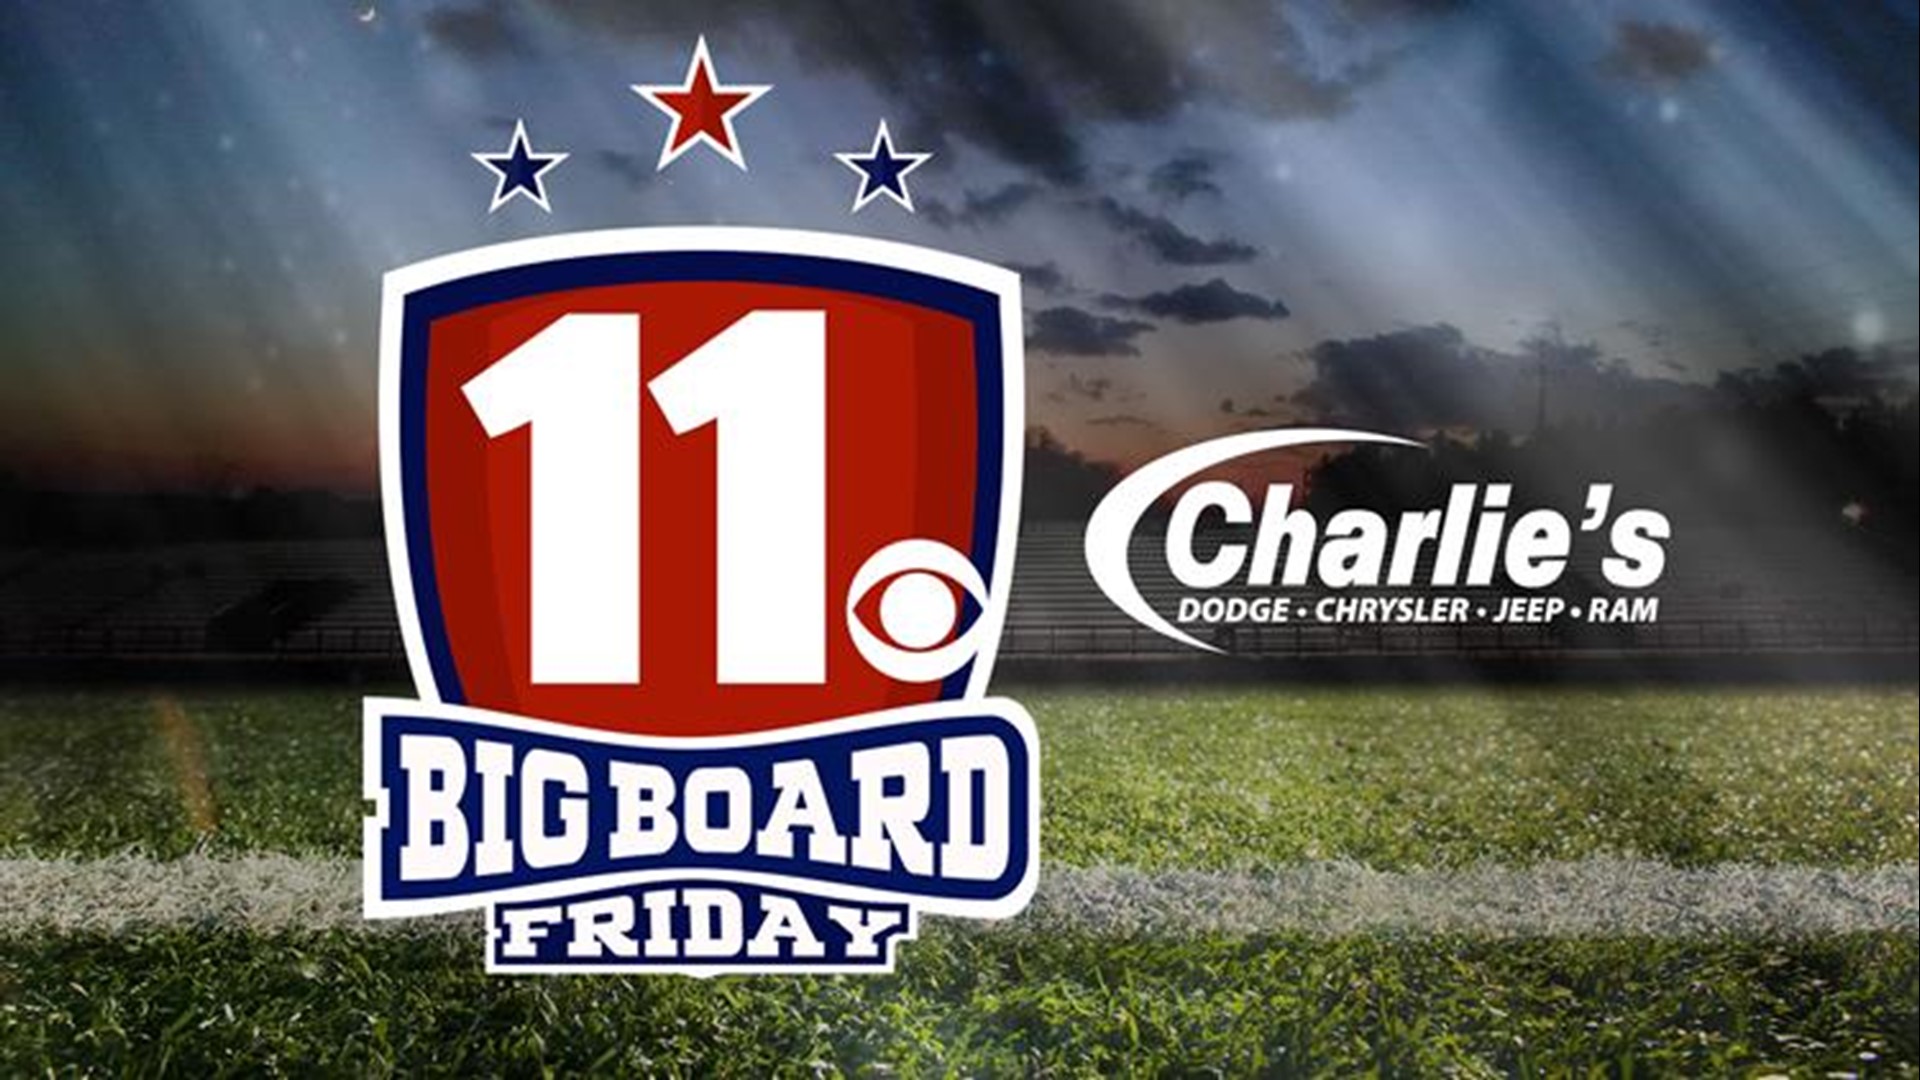 Every week, the WTOL 11 Sports team brings you highlights from high school football games across our area starting at 11 p.m. on WTOL 11. Welcome to the 2023 season!